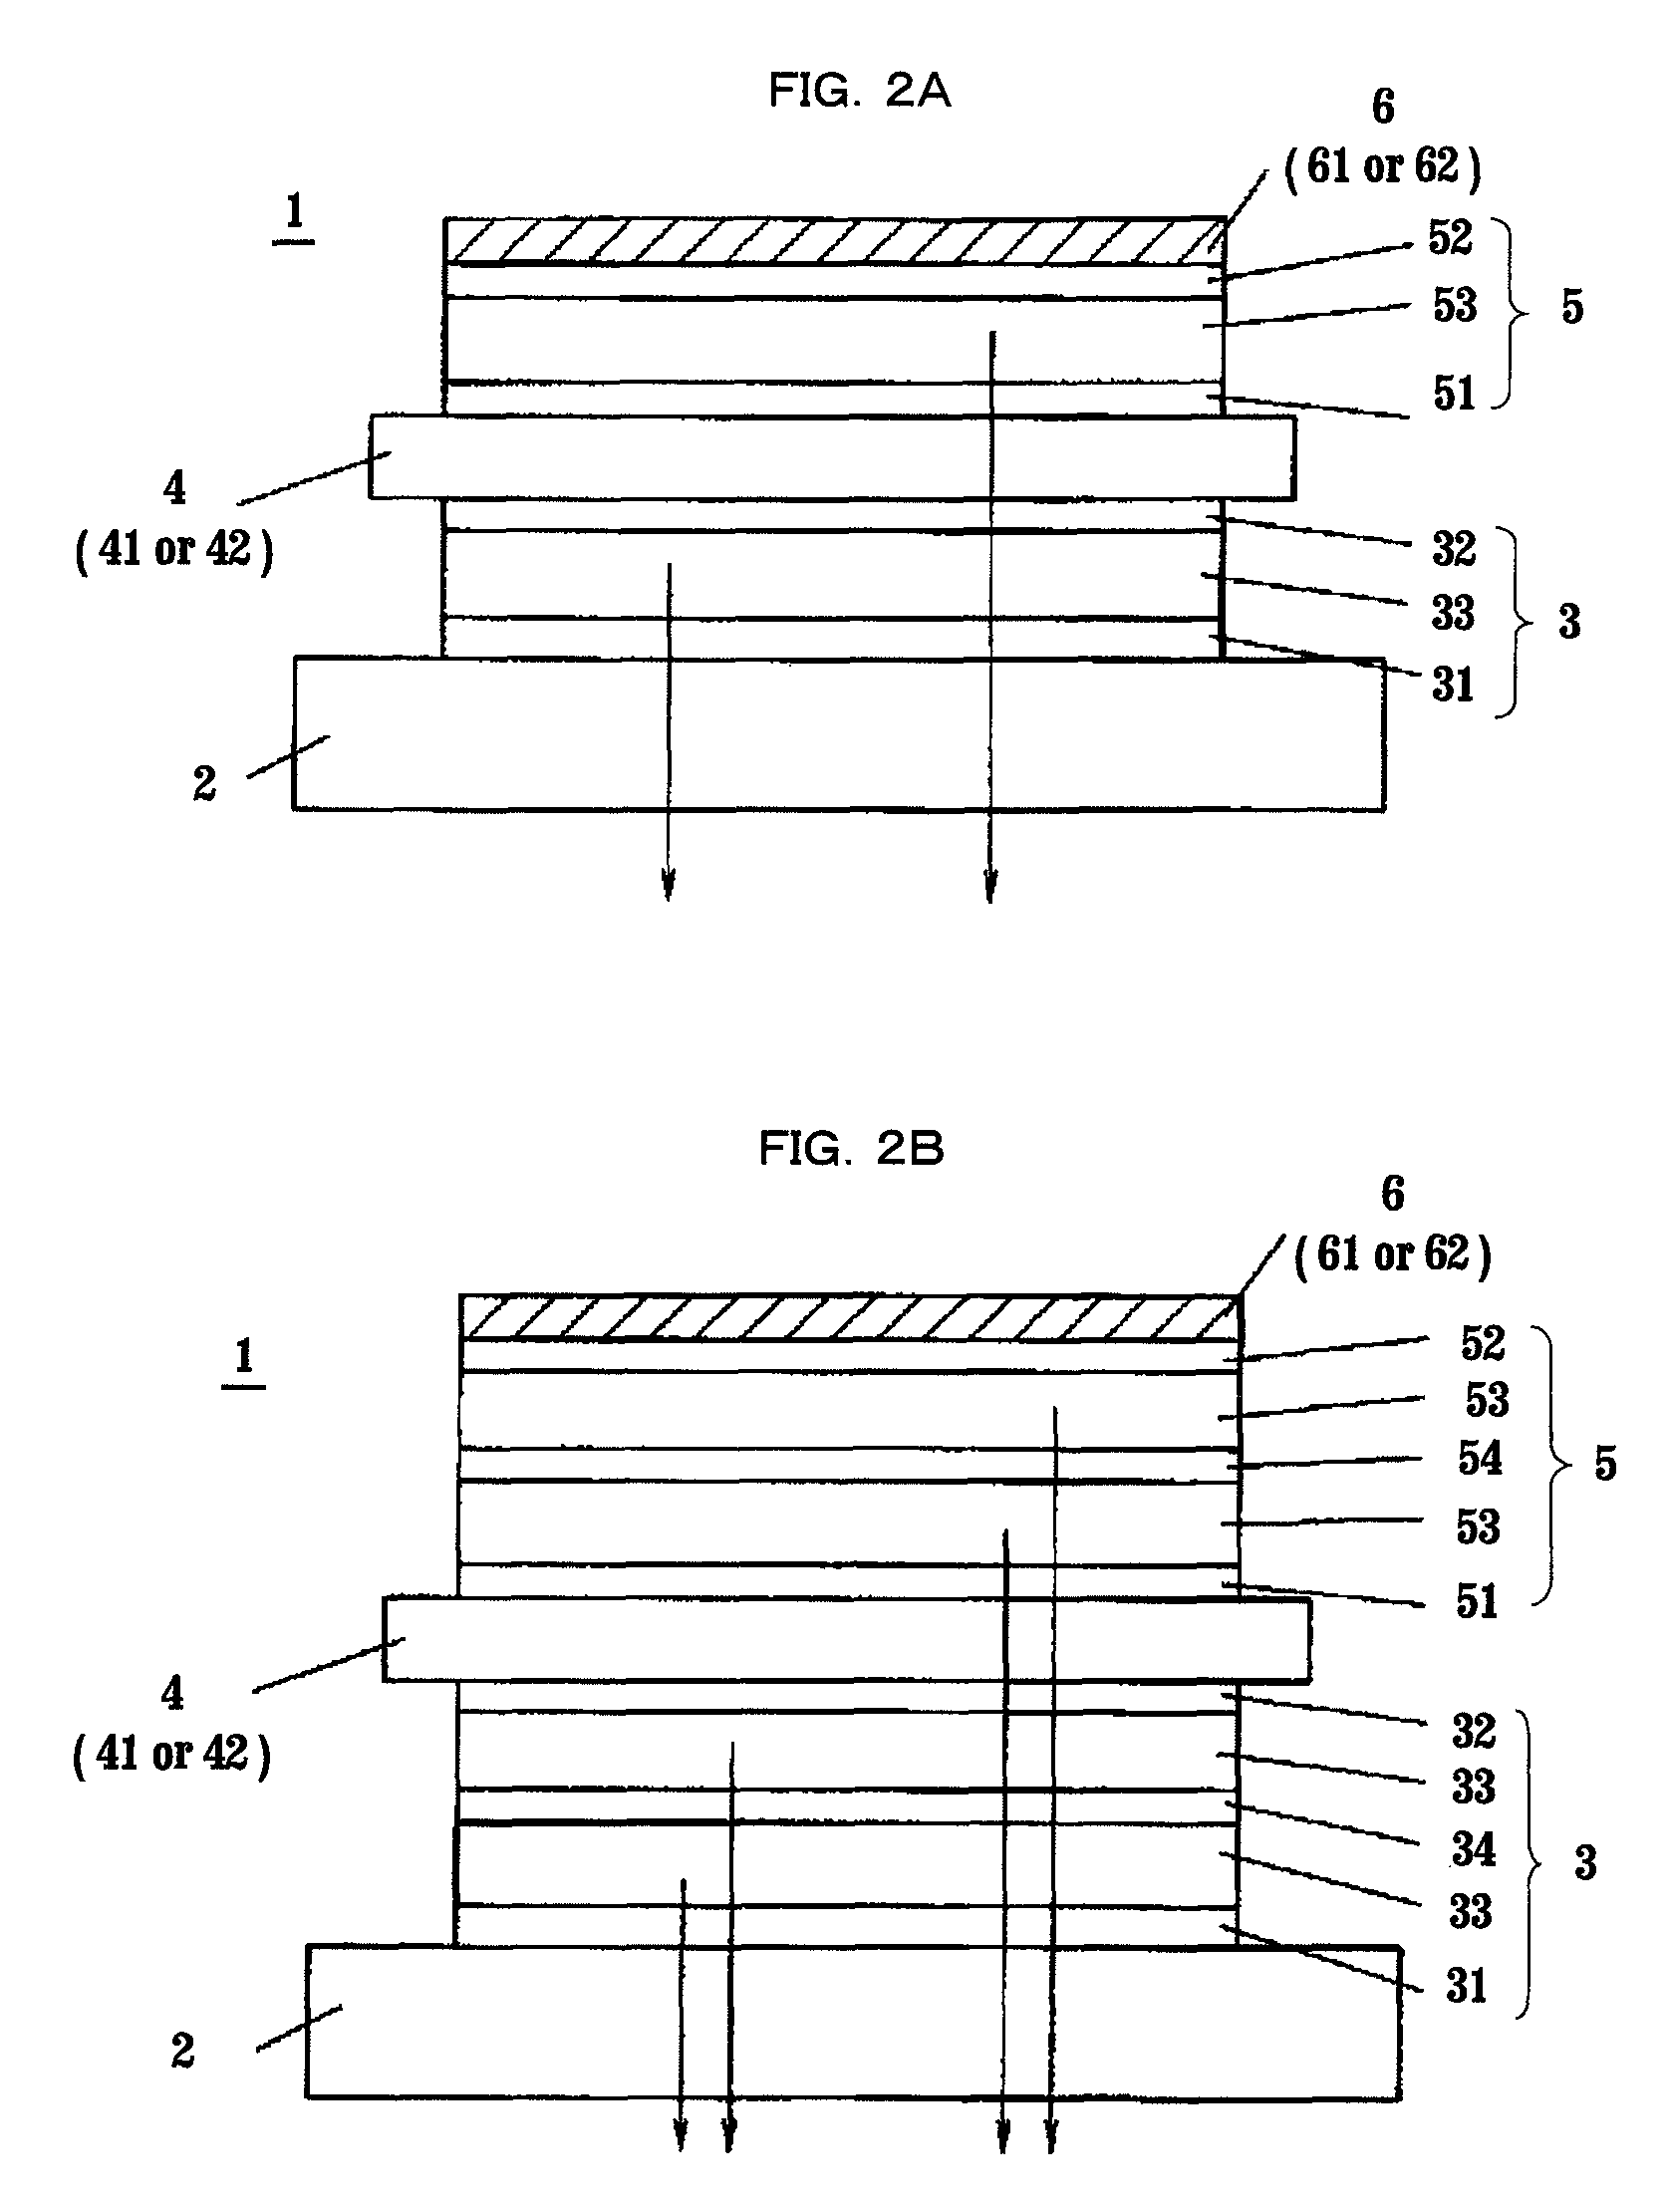 Organic light emitting element and method of manufacturing the same